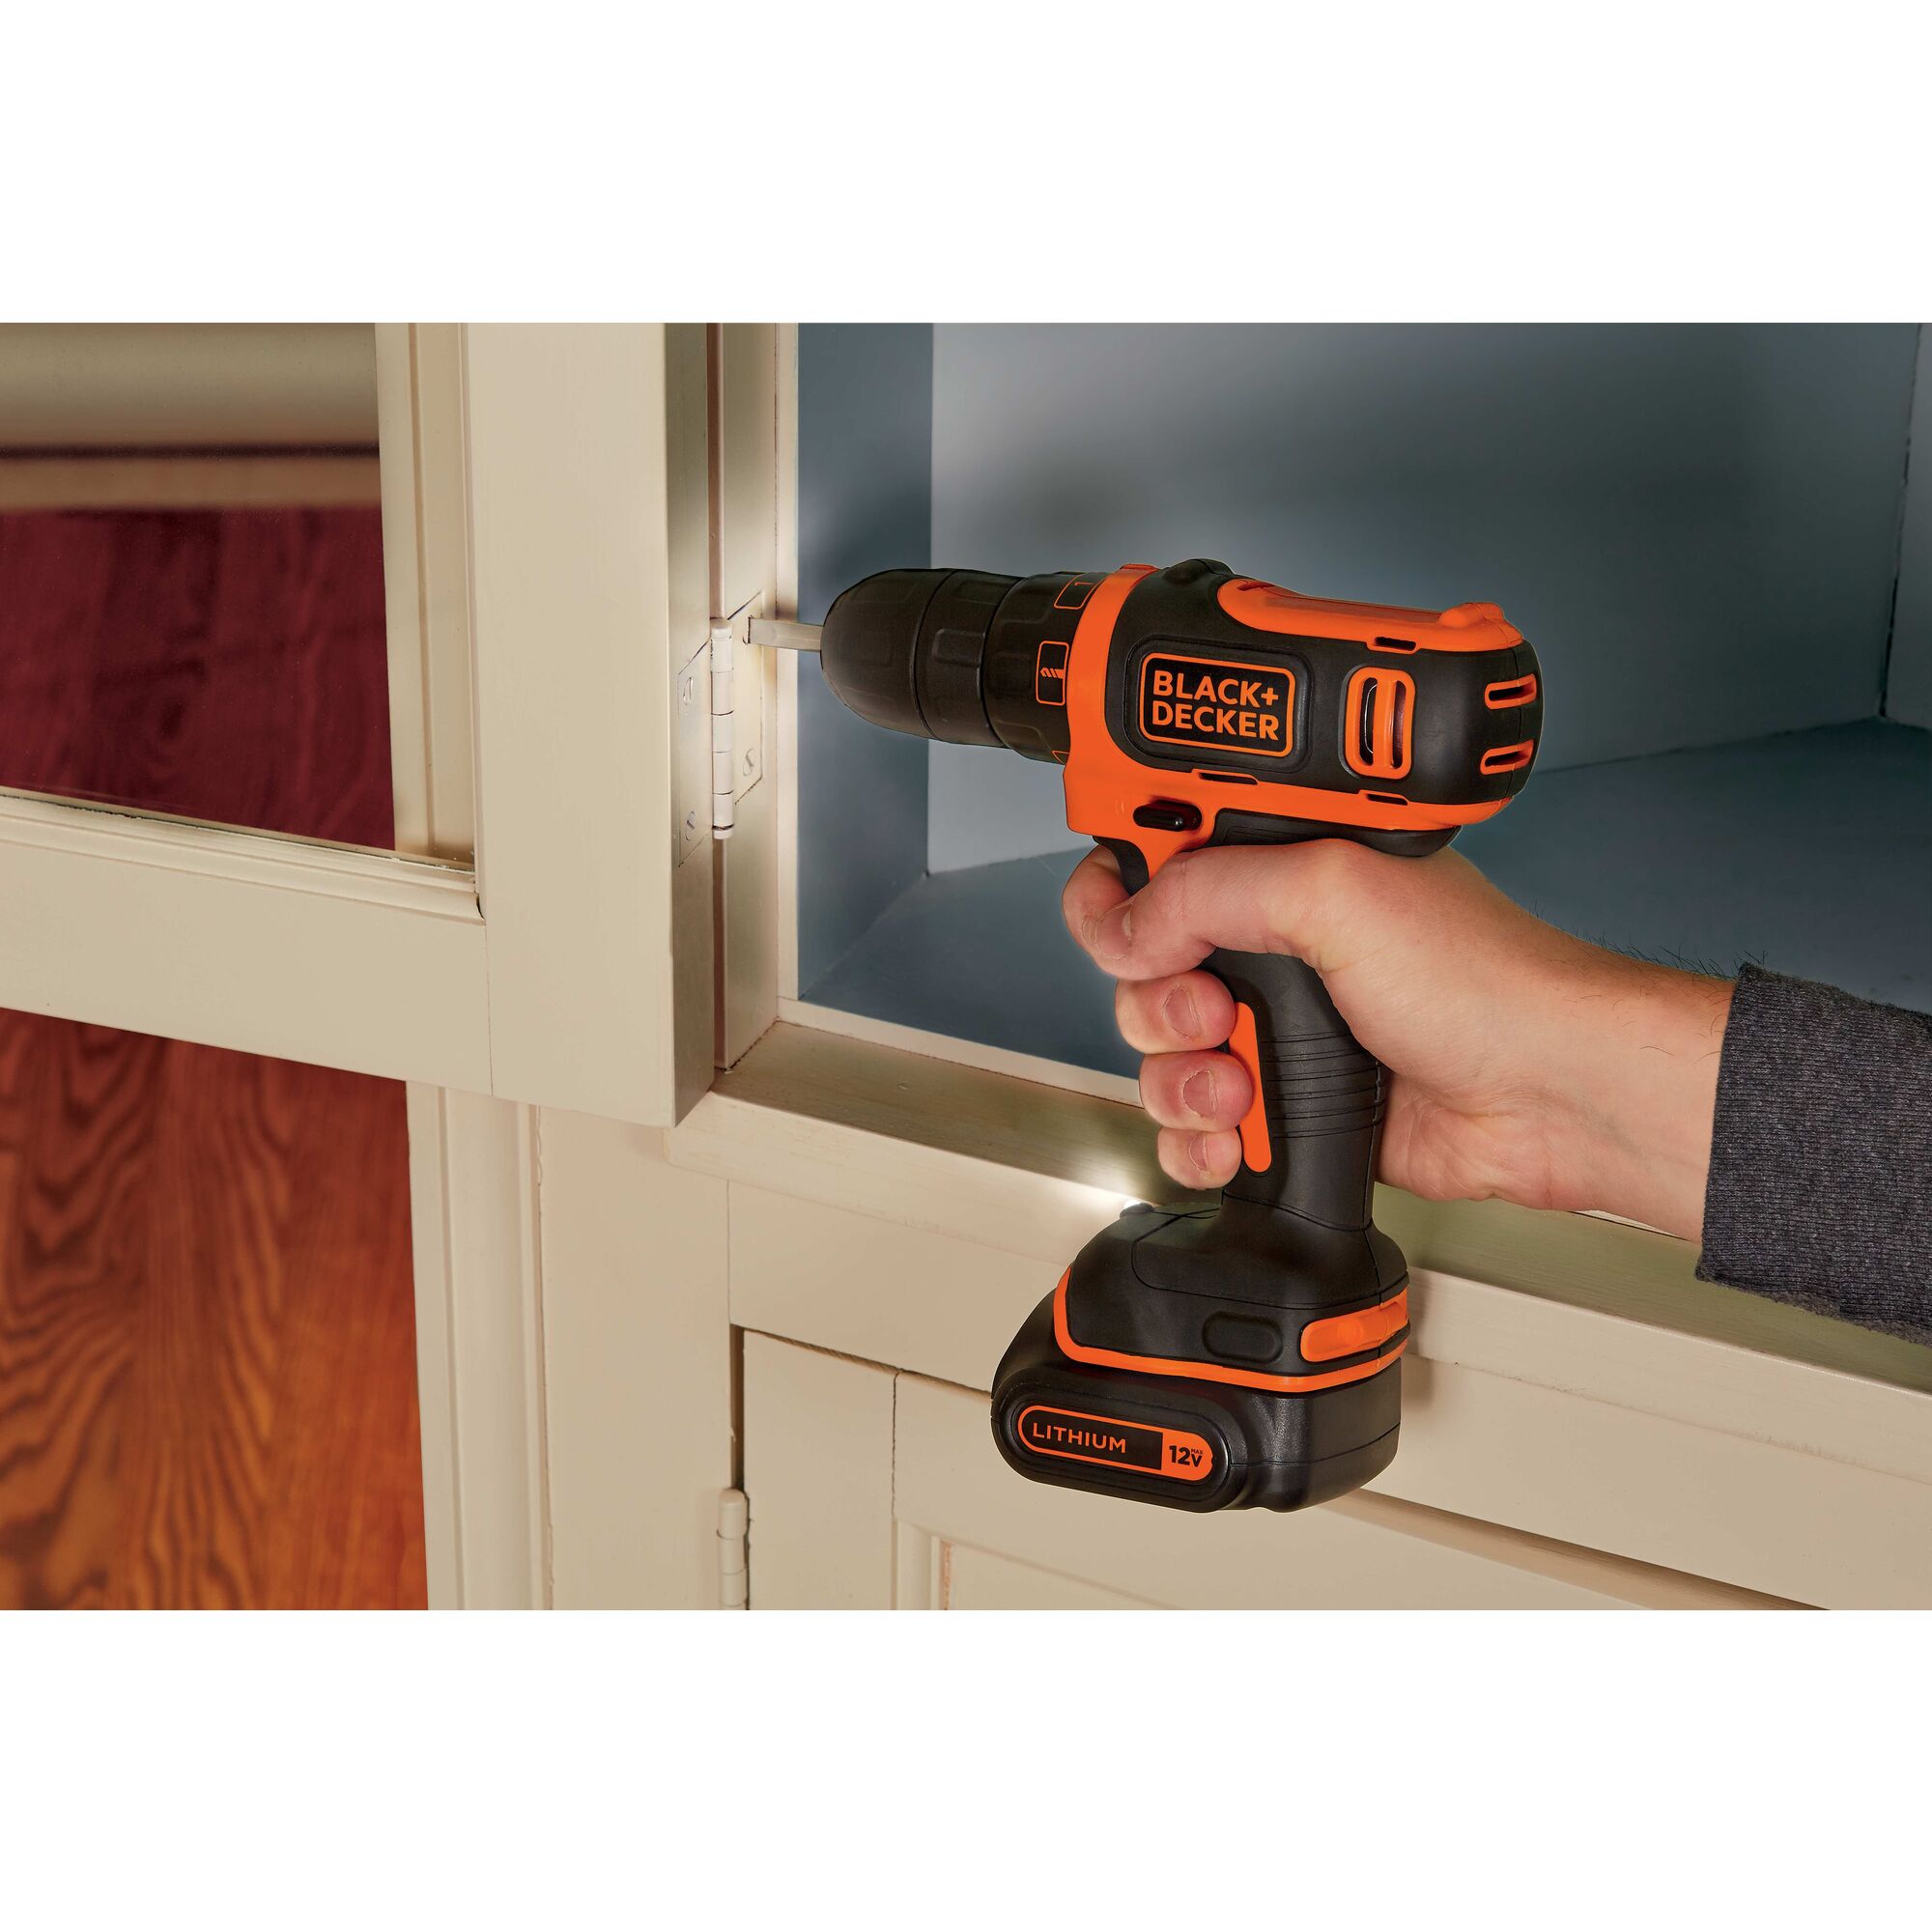 Lithium ion drill and driver being used to drill a windows hinge.